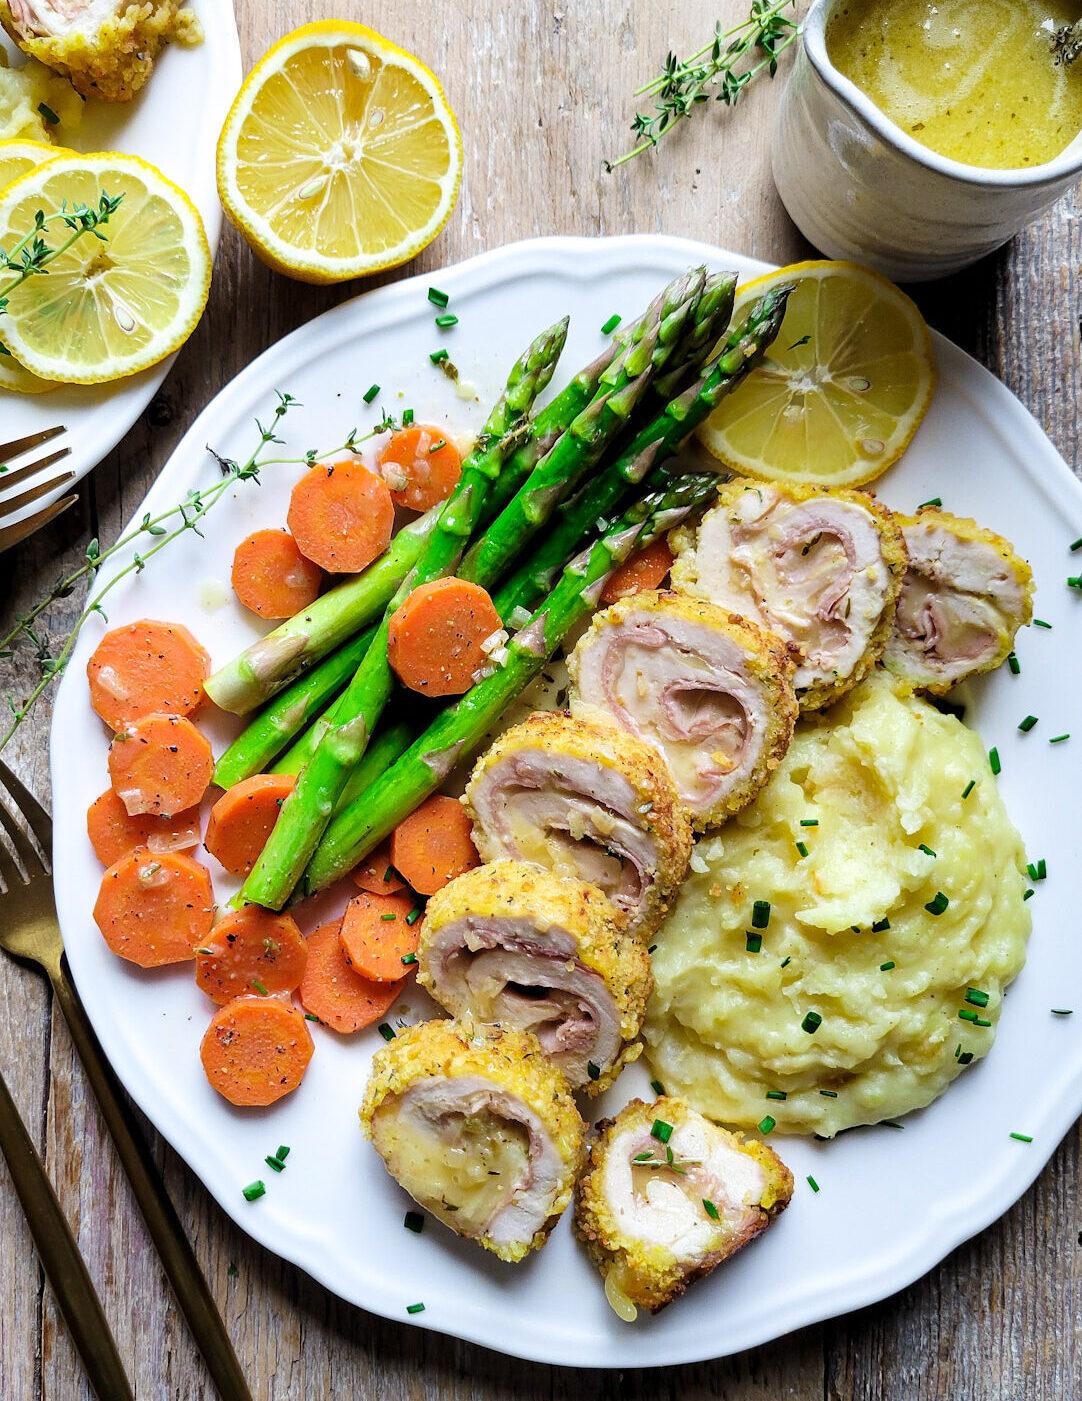 Two plates with Chicken Cordon Bleu sliced and served with mashed potatoes, asparagus and carrots. A container of lemon butter sauce is to the side.